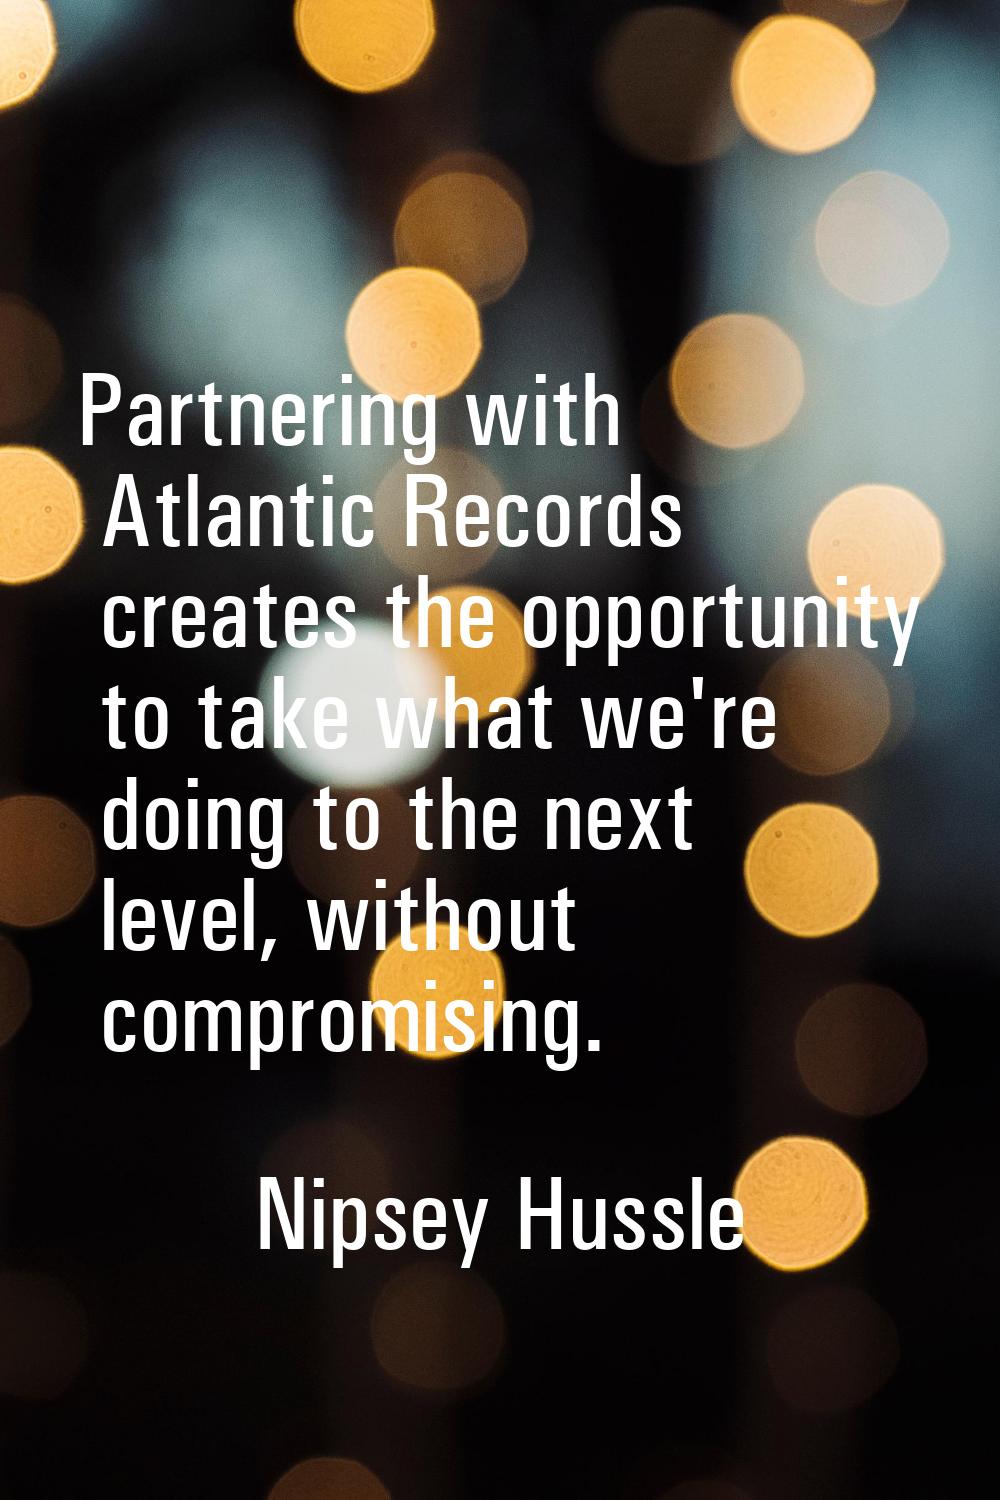 Partnering with Atlantic Records creates the opportunity to take what we're doing to the next level